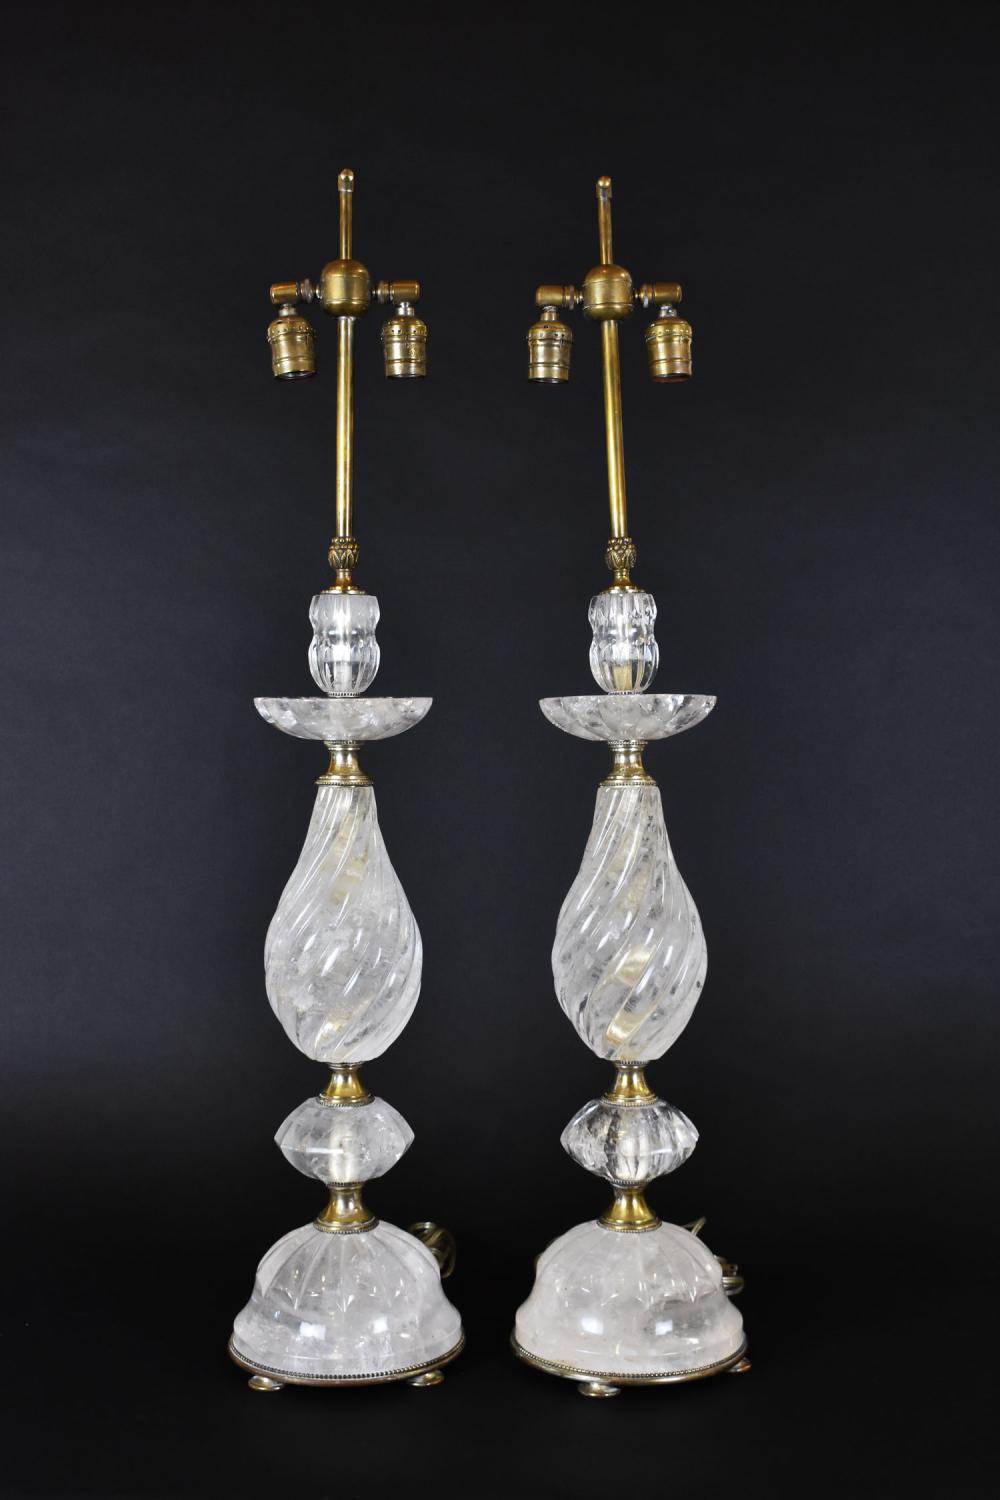 PAIR OF ROCK CRYSTAL TABLE LAMPSComposed